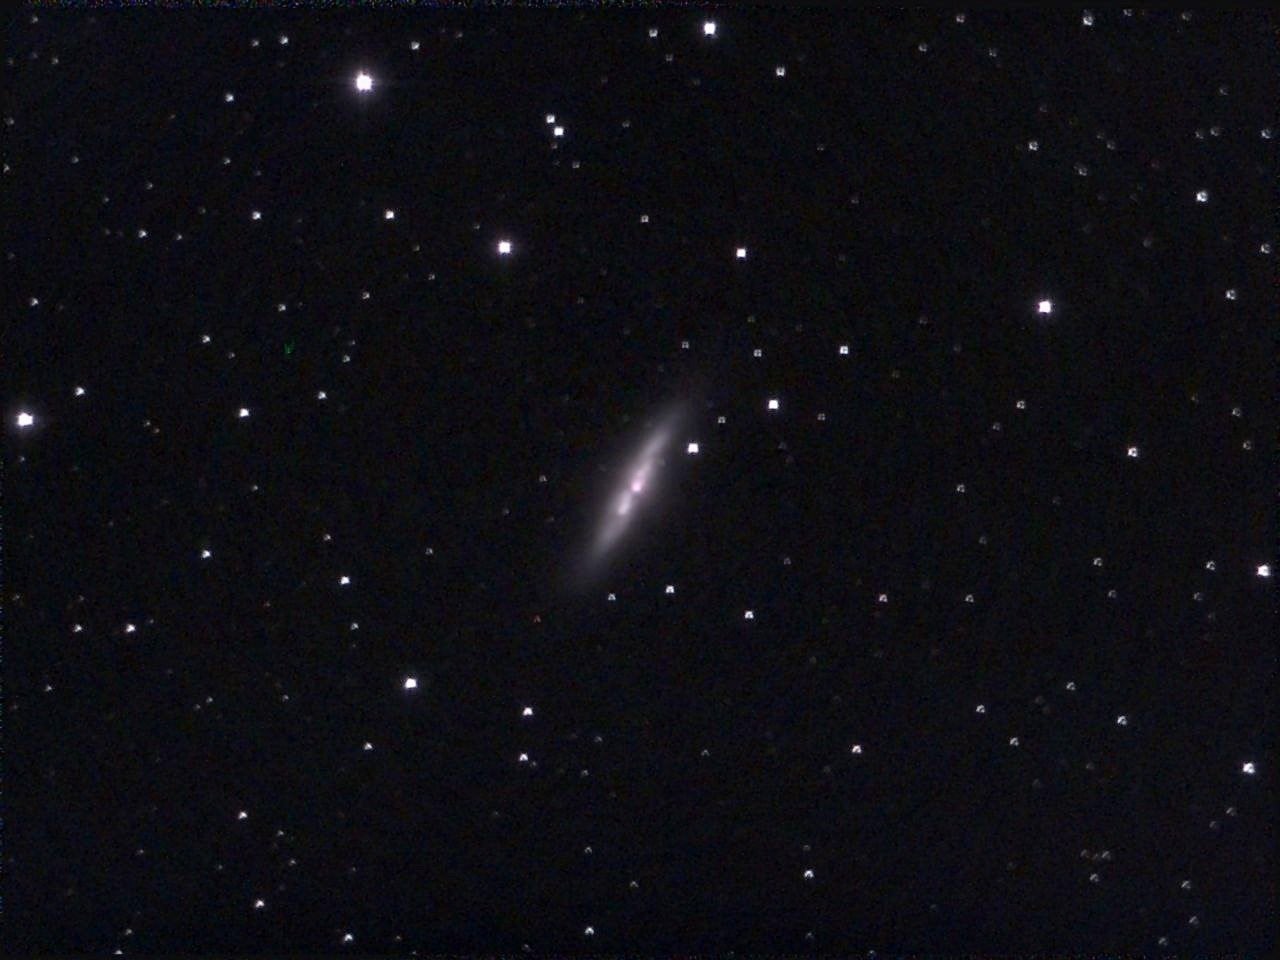 A 12 minute exposure of the Cigar Galaxy, captured with the Unistellar eQuinox 2